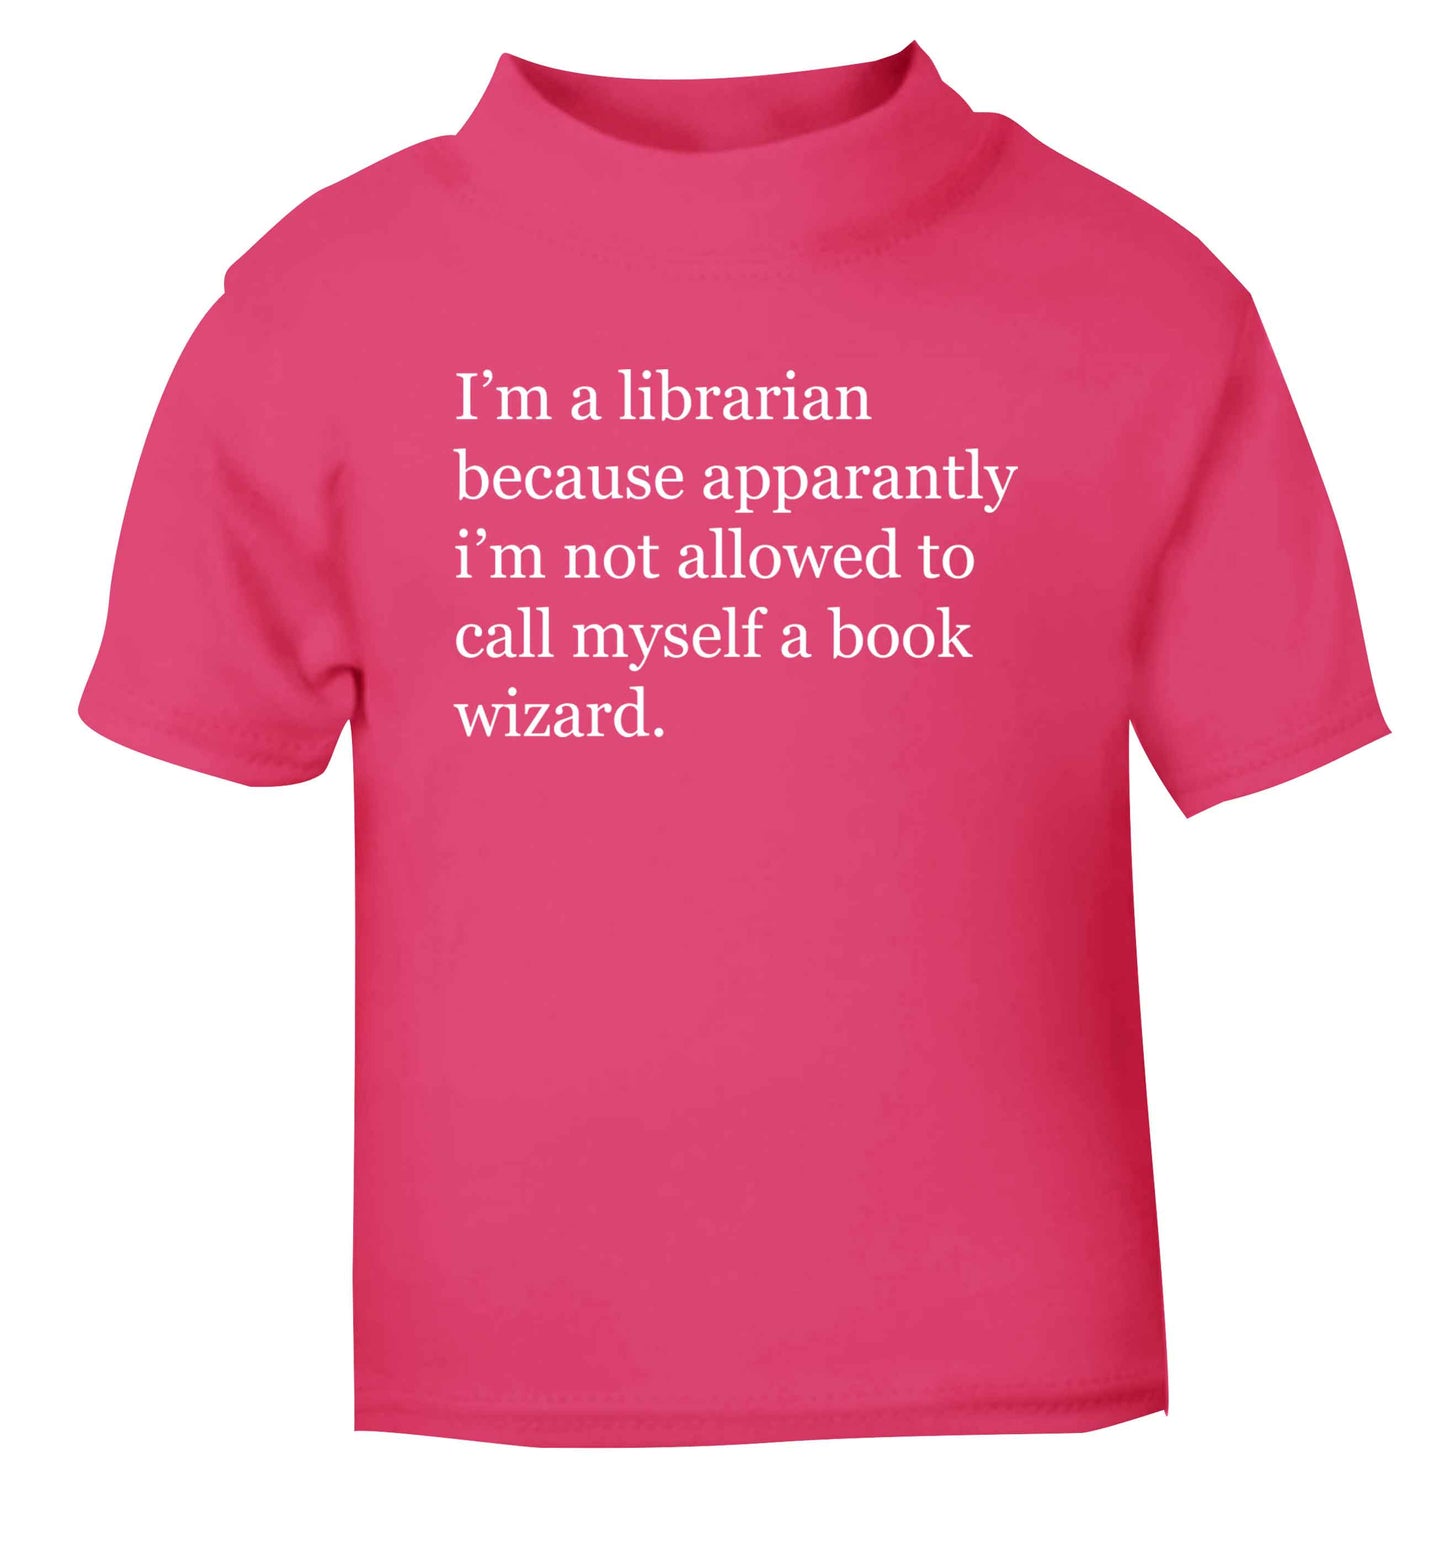 iÕm a librarian because apparantly iÕm not allowed to call myself a book wizard pink Baby Toddler Tshirt 2 Years